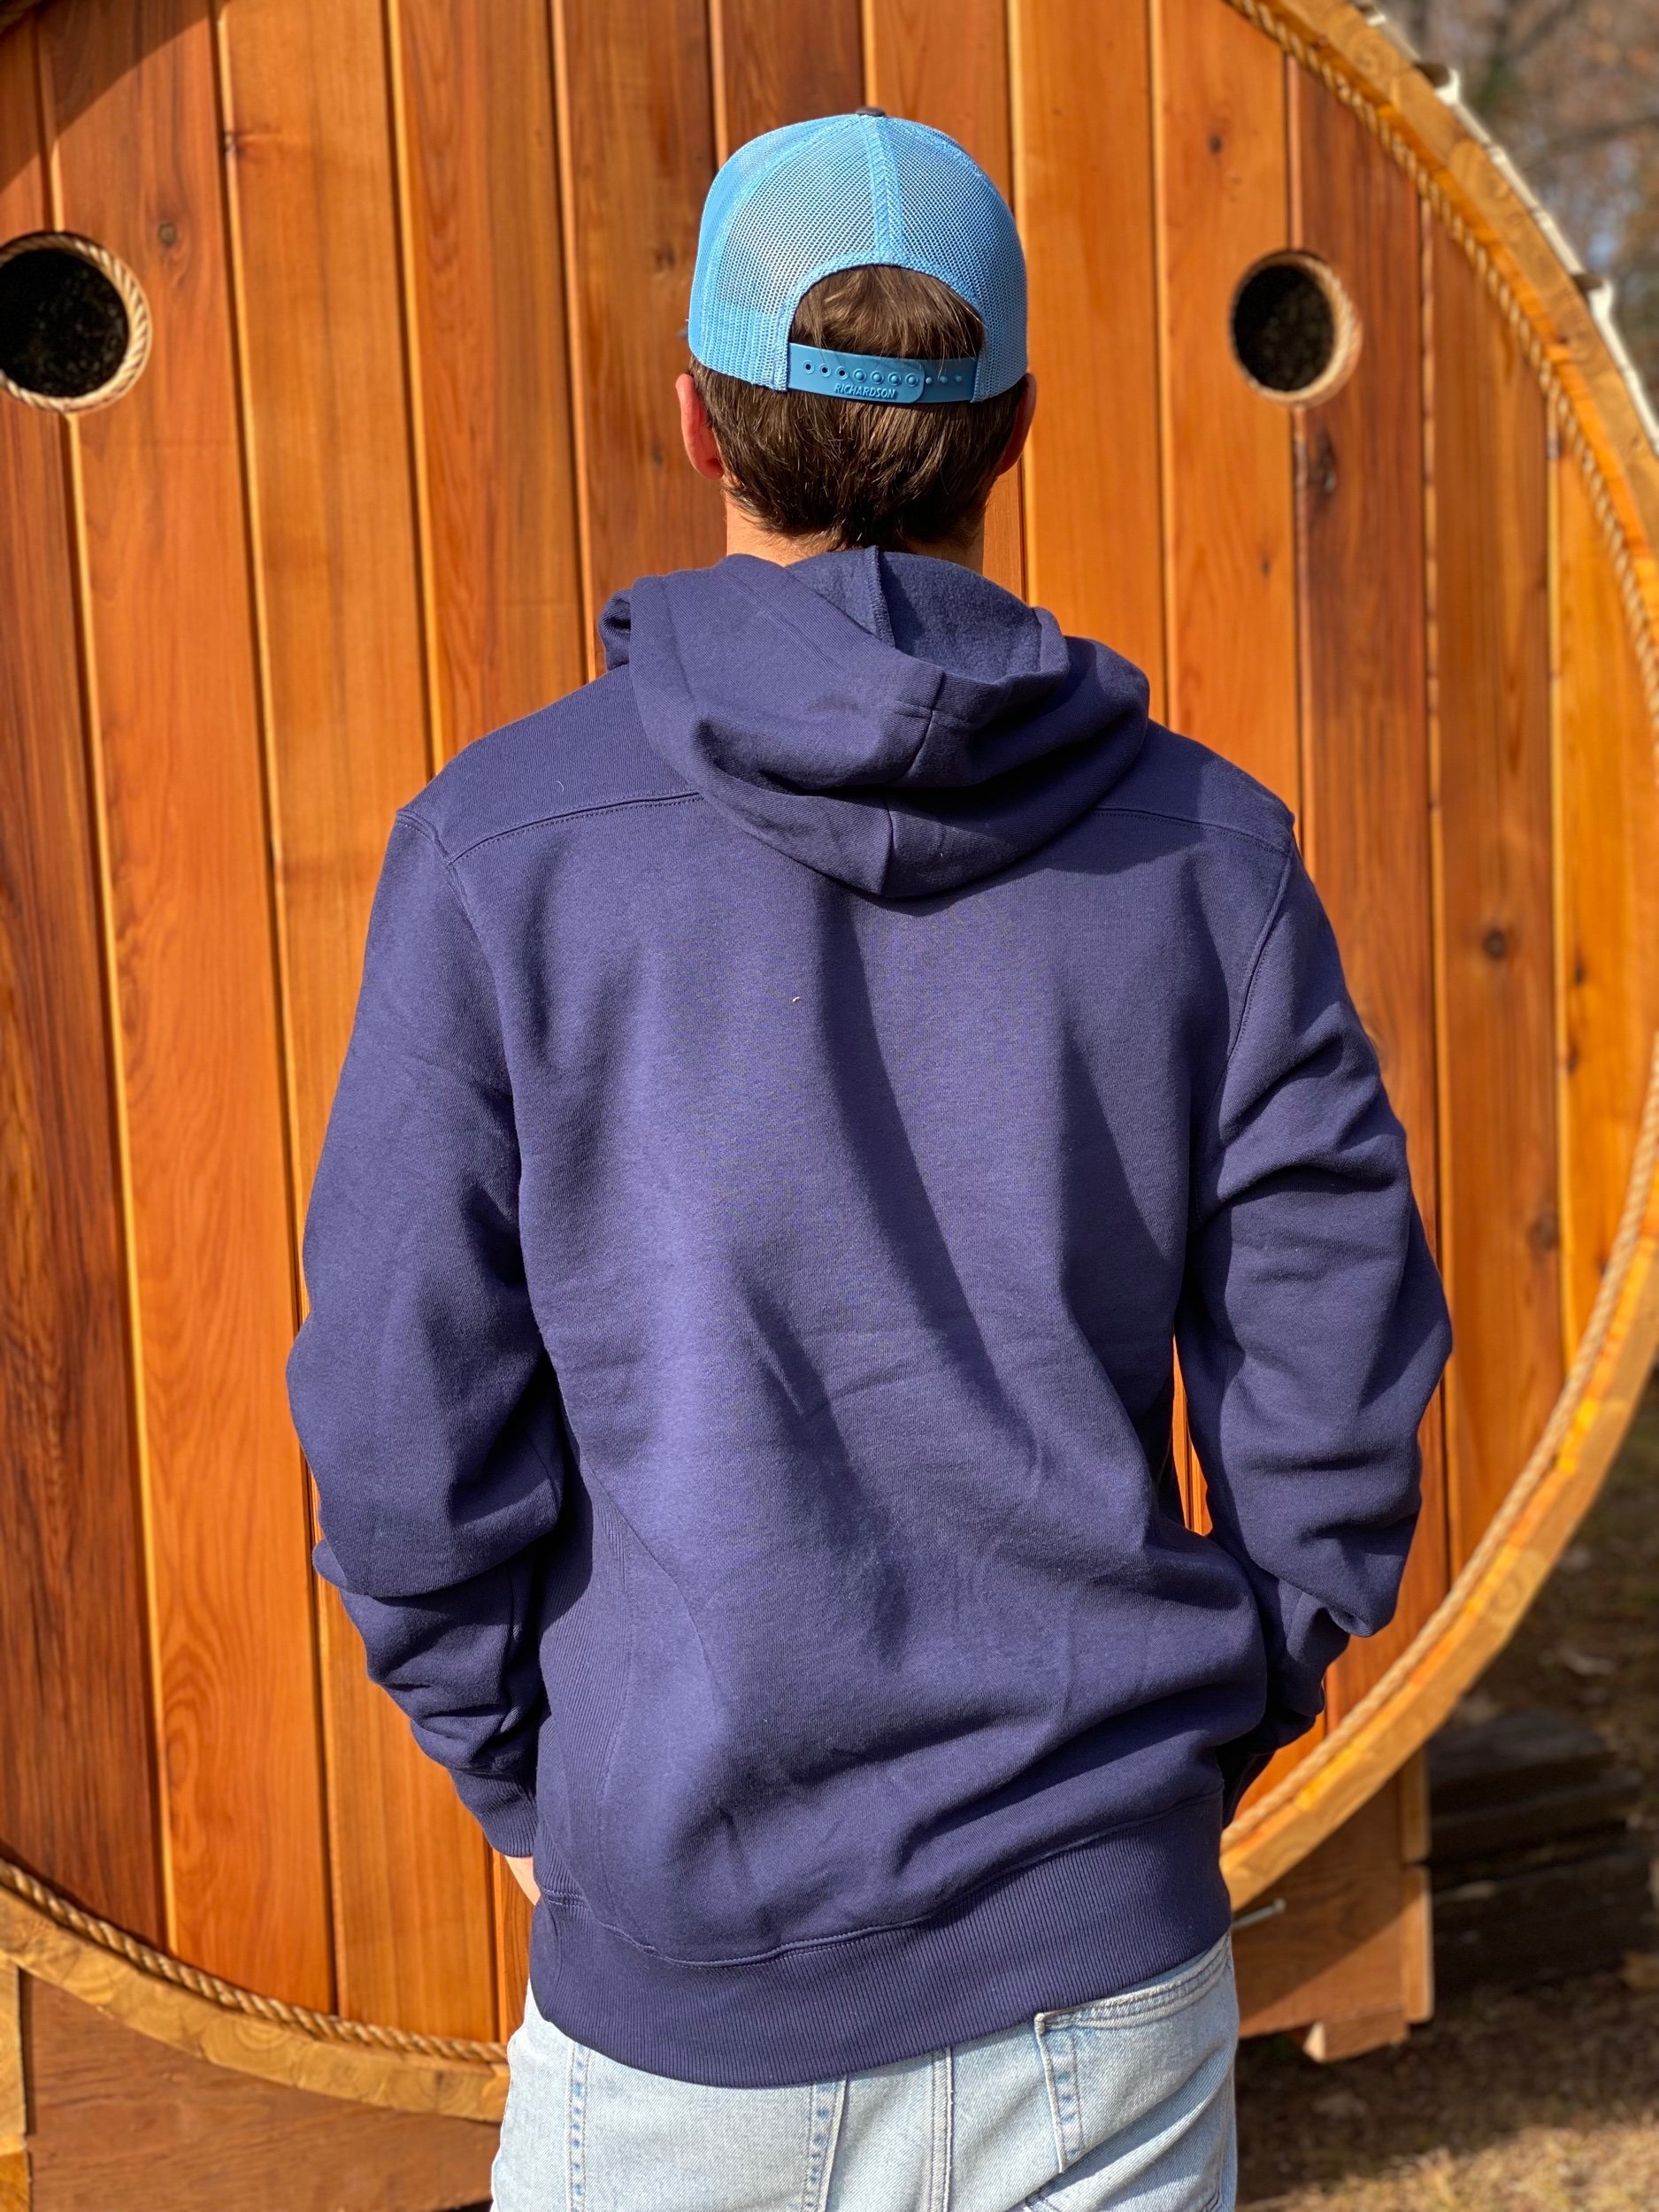 Navy pond hockey hoodie with laces